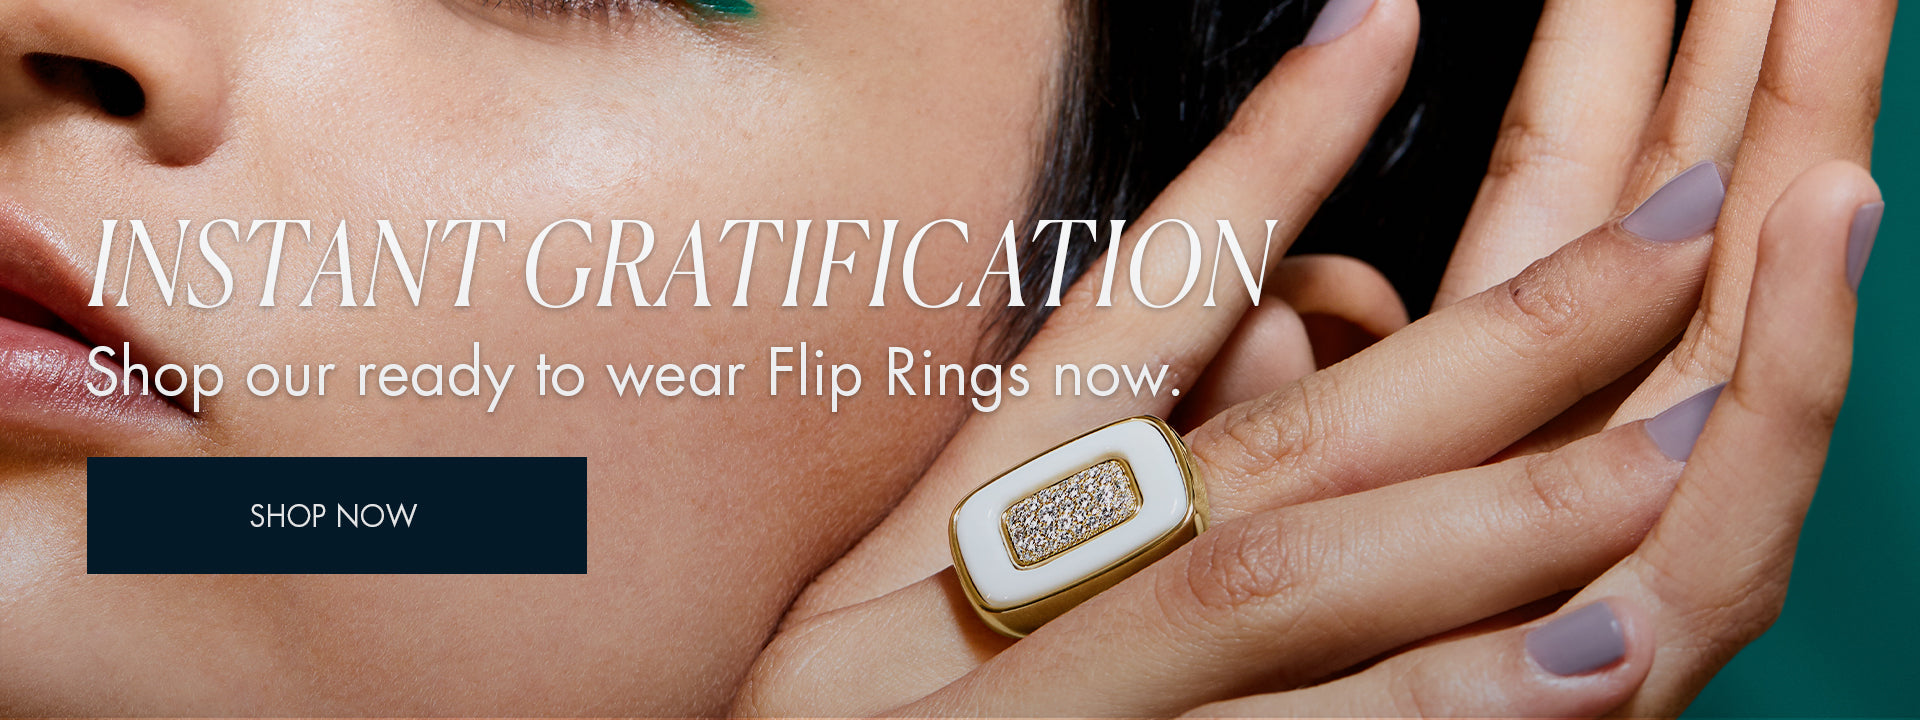 Instant Gratification Shop our ready to wear Flip Rings now.<br data-mce-fragment="1">